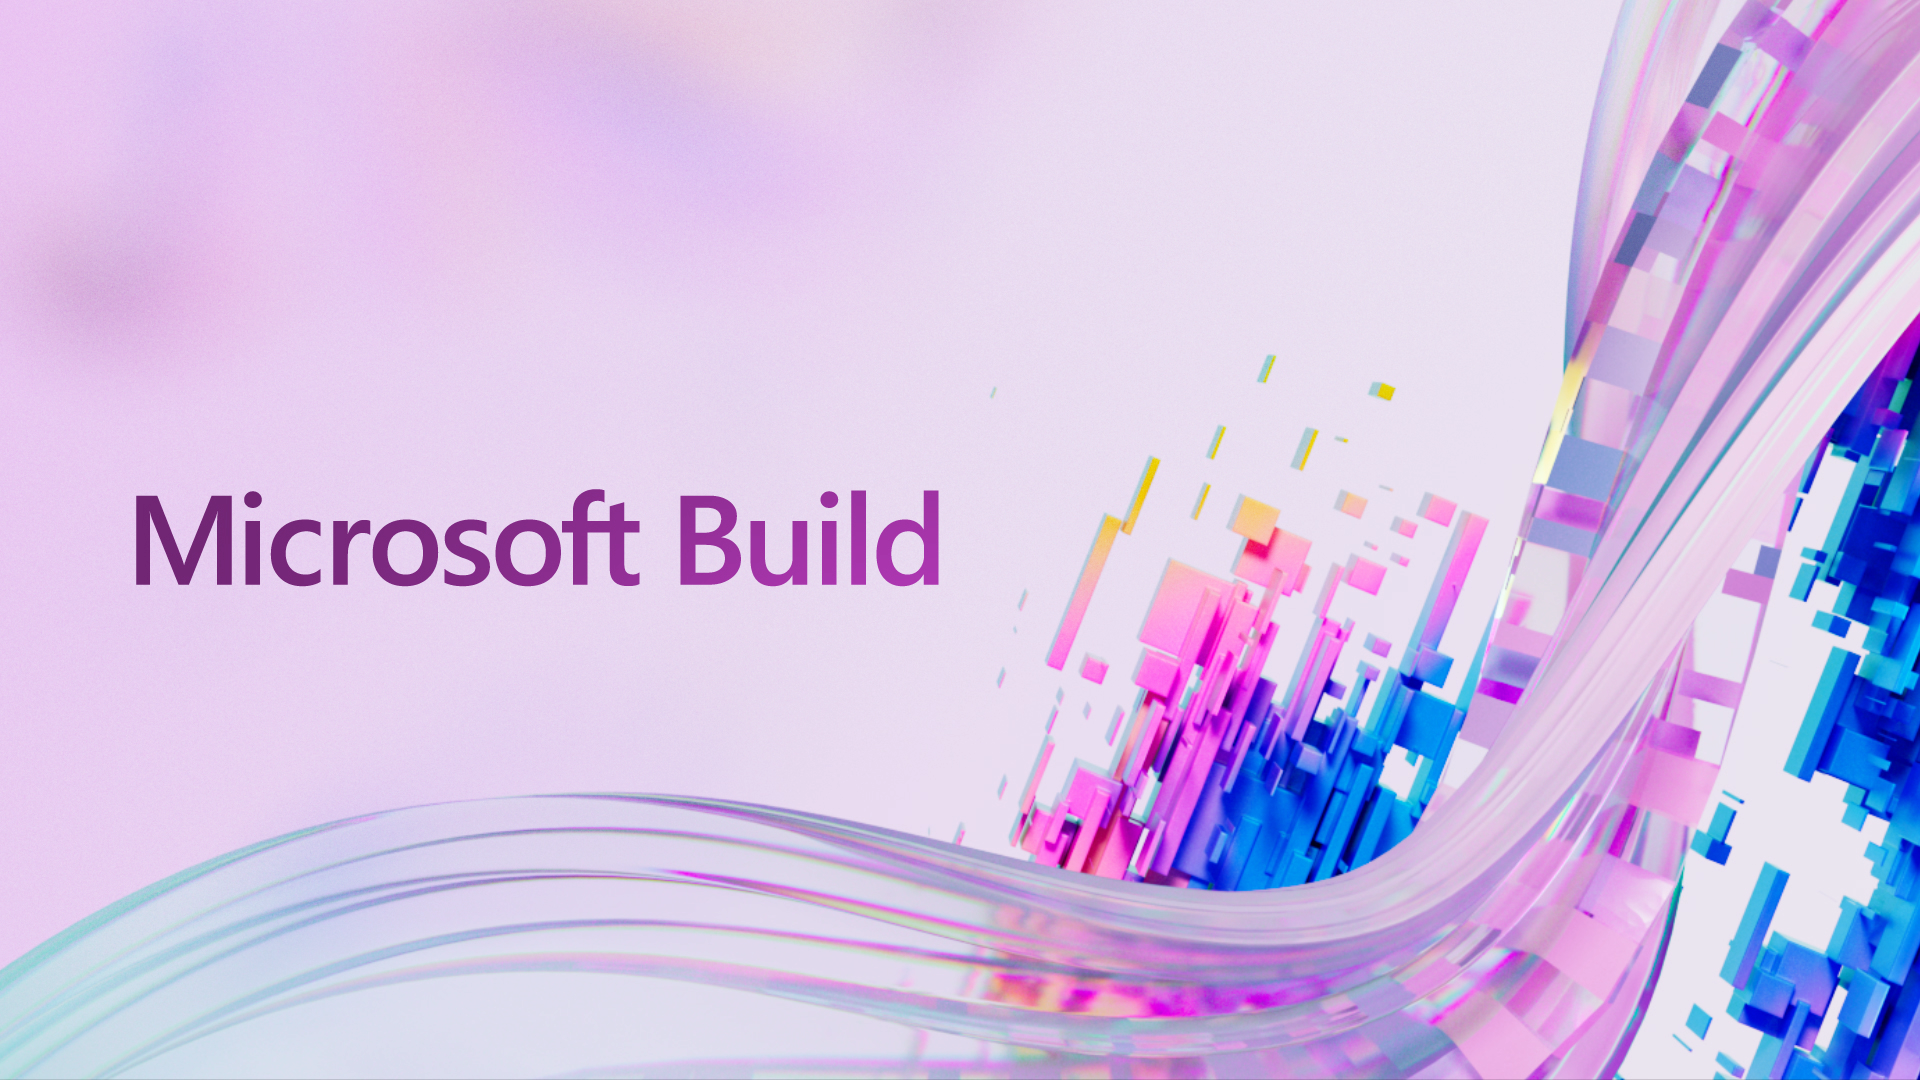 Microsoft Build illustration with colourful blocks and a wave pattern of a purple theme.